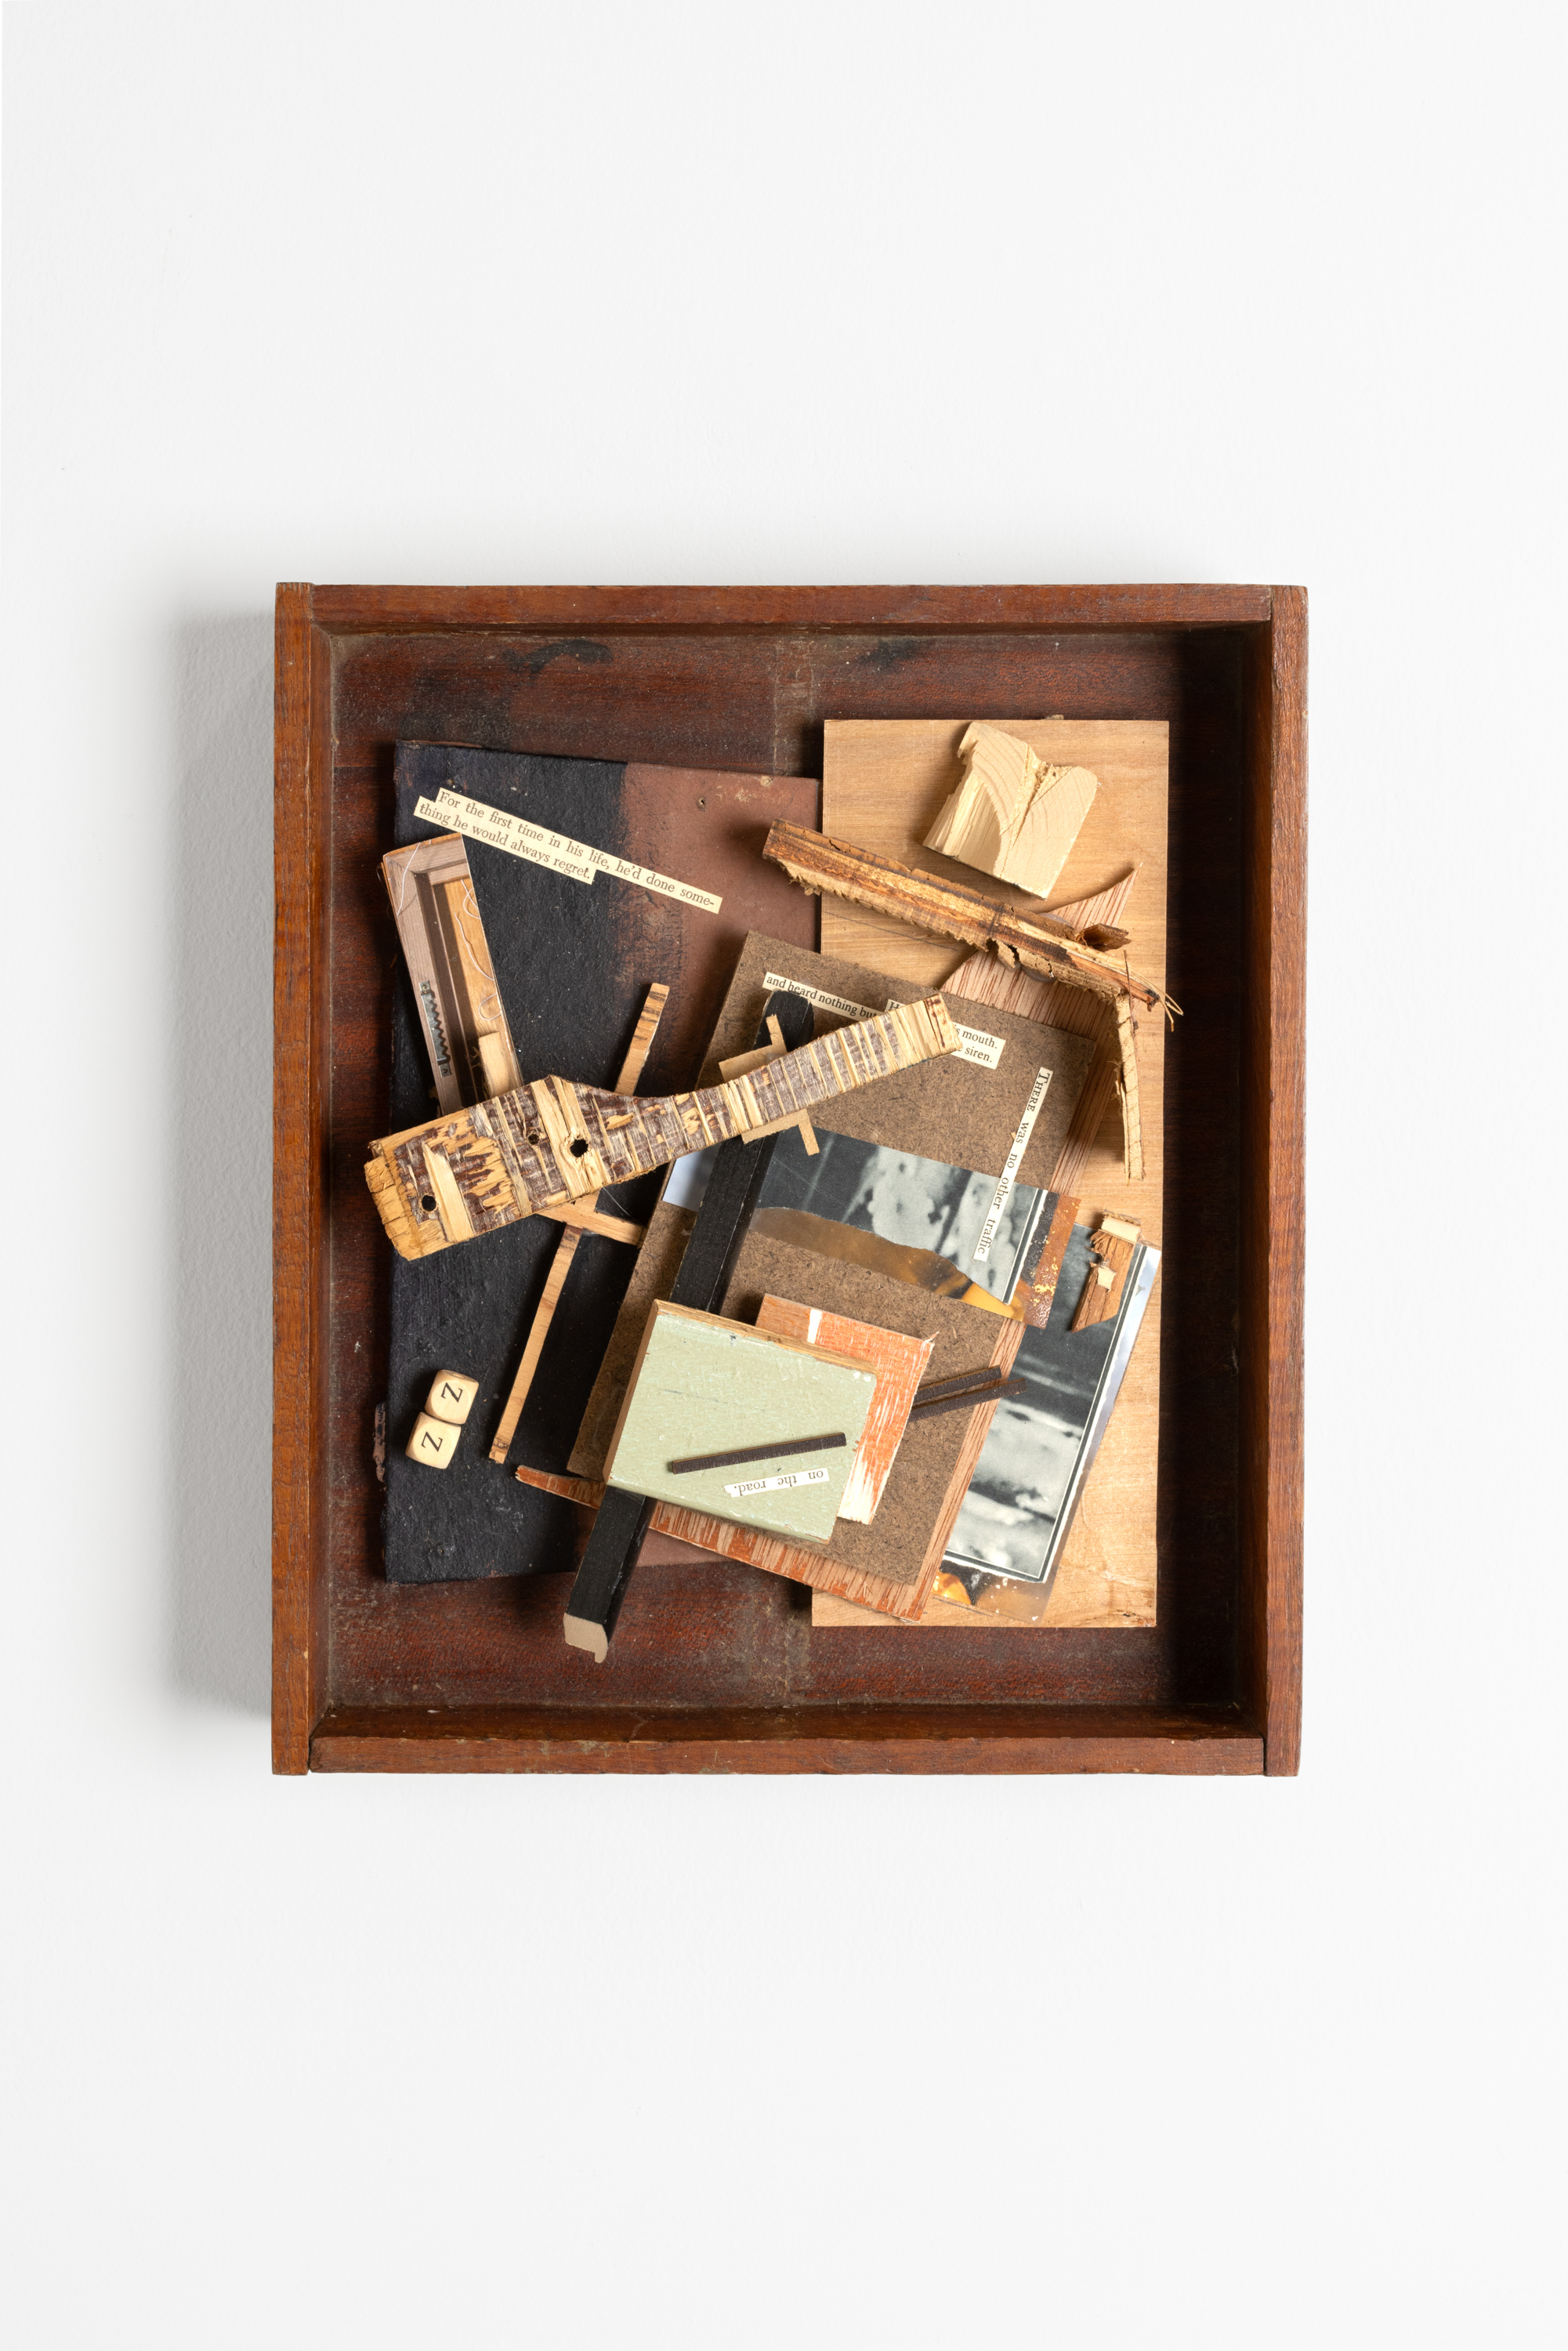 Color image of a mixed media artwork with paper and photo collage on wooden pieces within a wooden box on a white wall